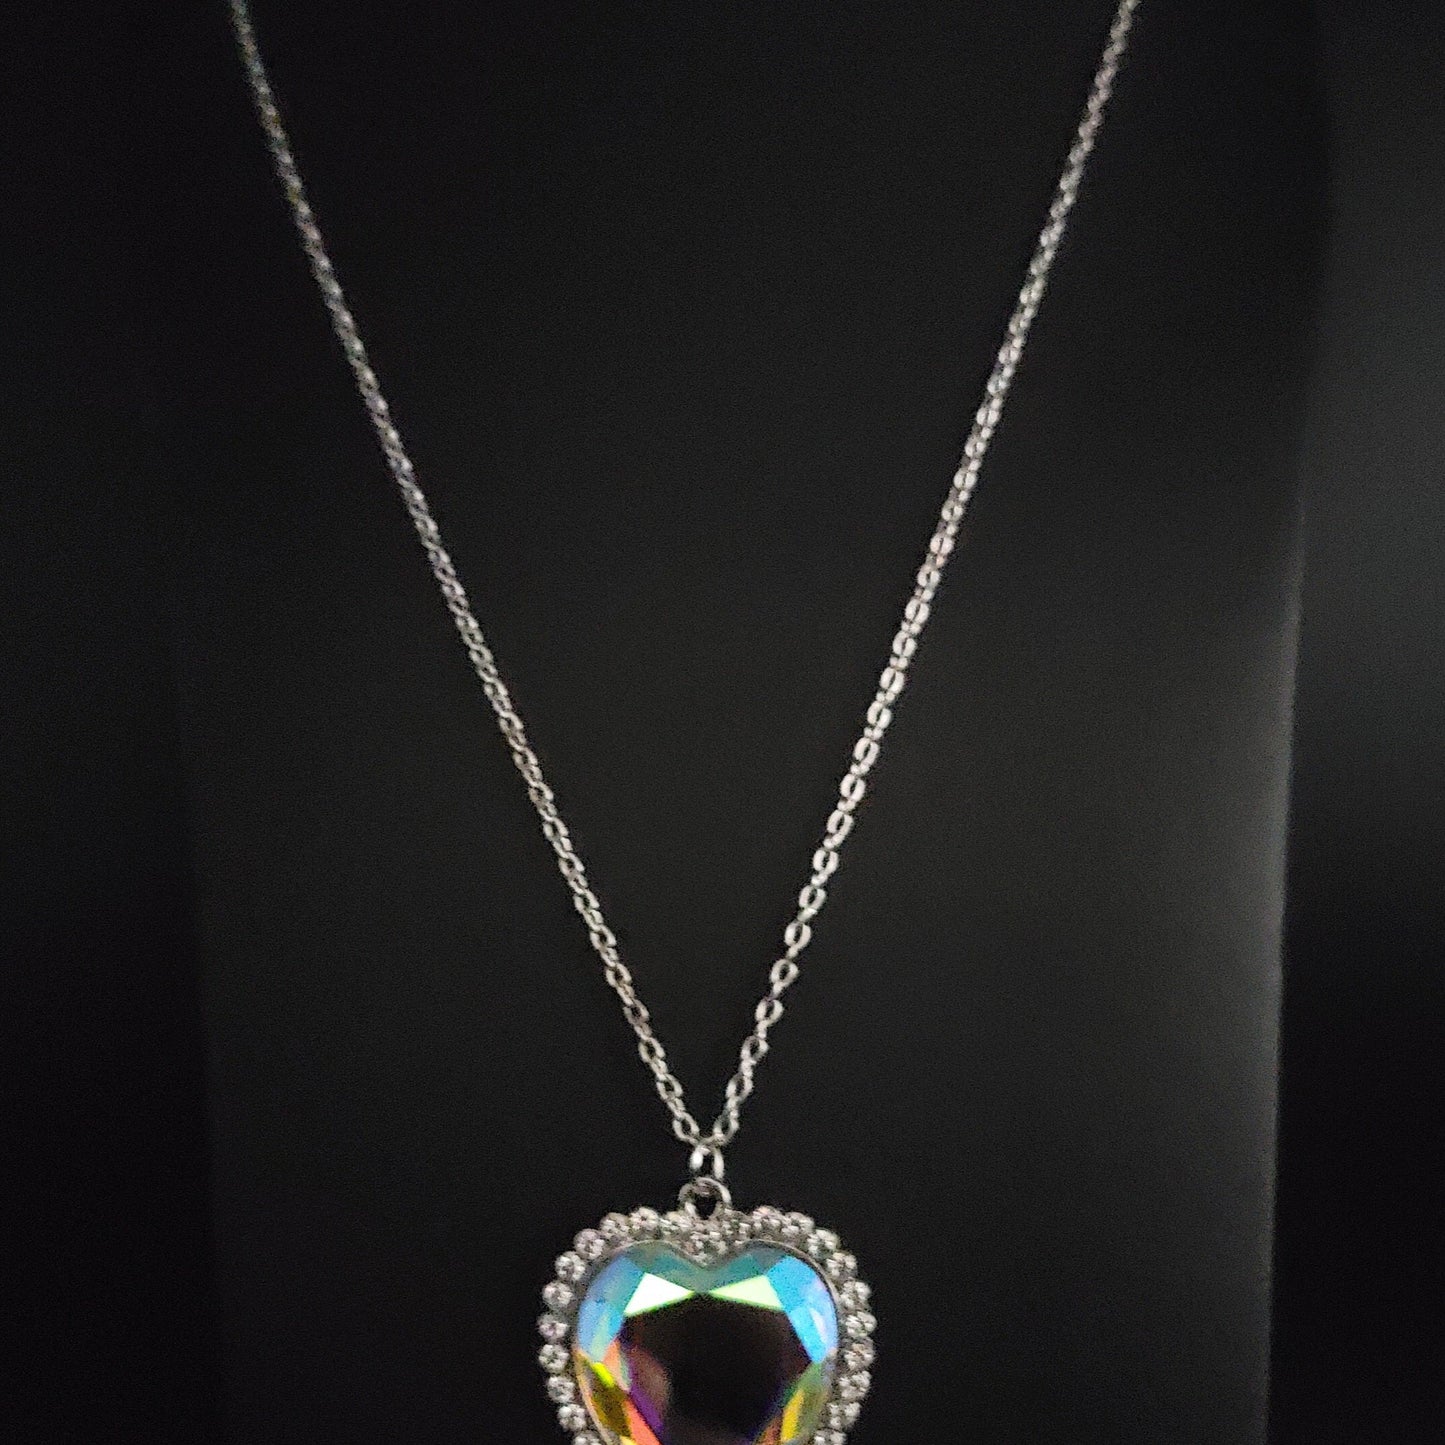 Prismatically Twitterpated - Multi Iridescent Heart Necklace - Danielle Baker's Black Diamond Exclusive